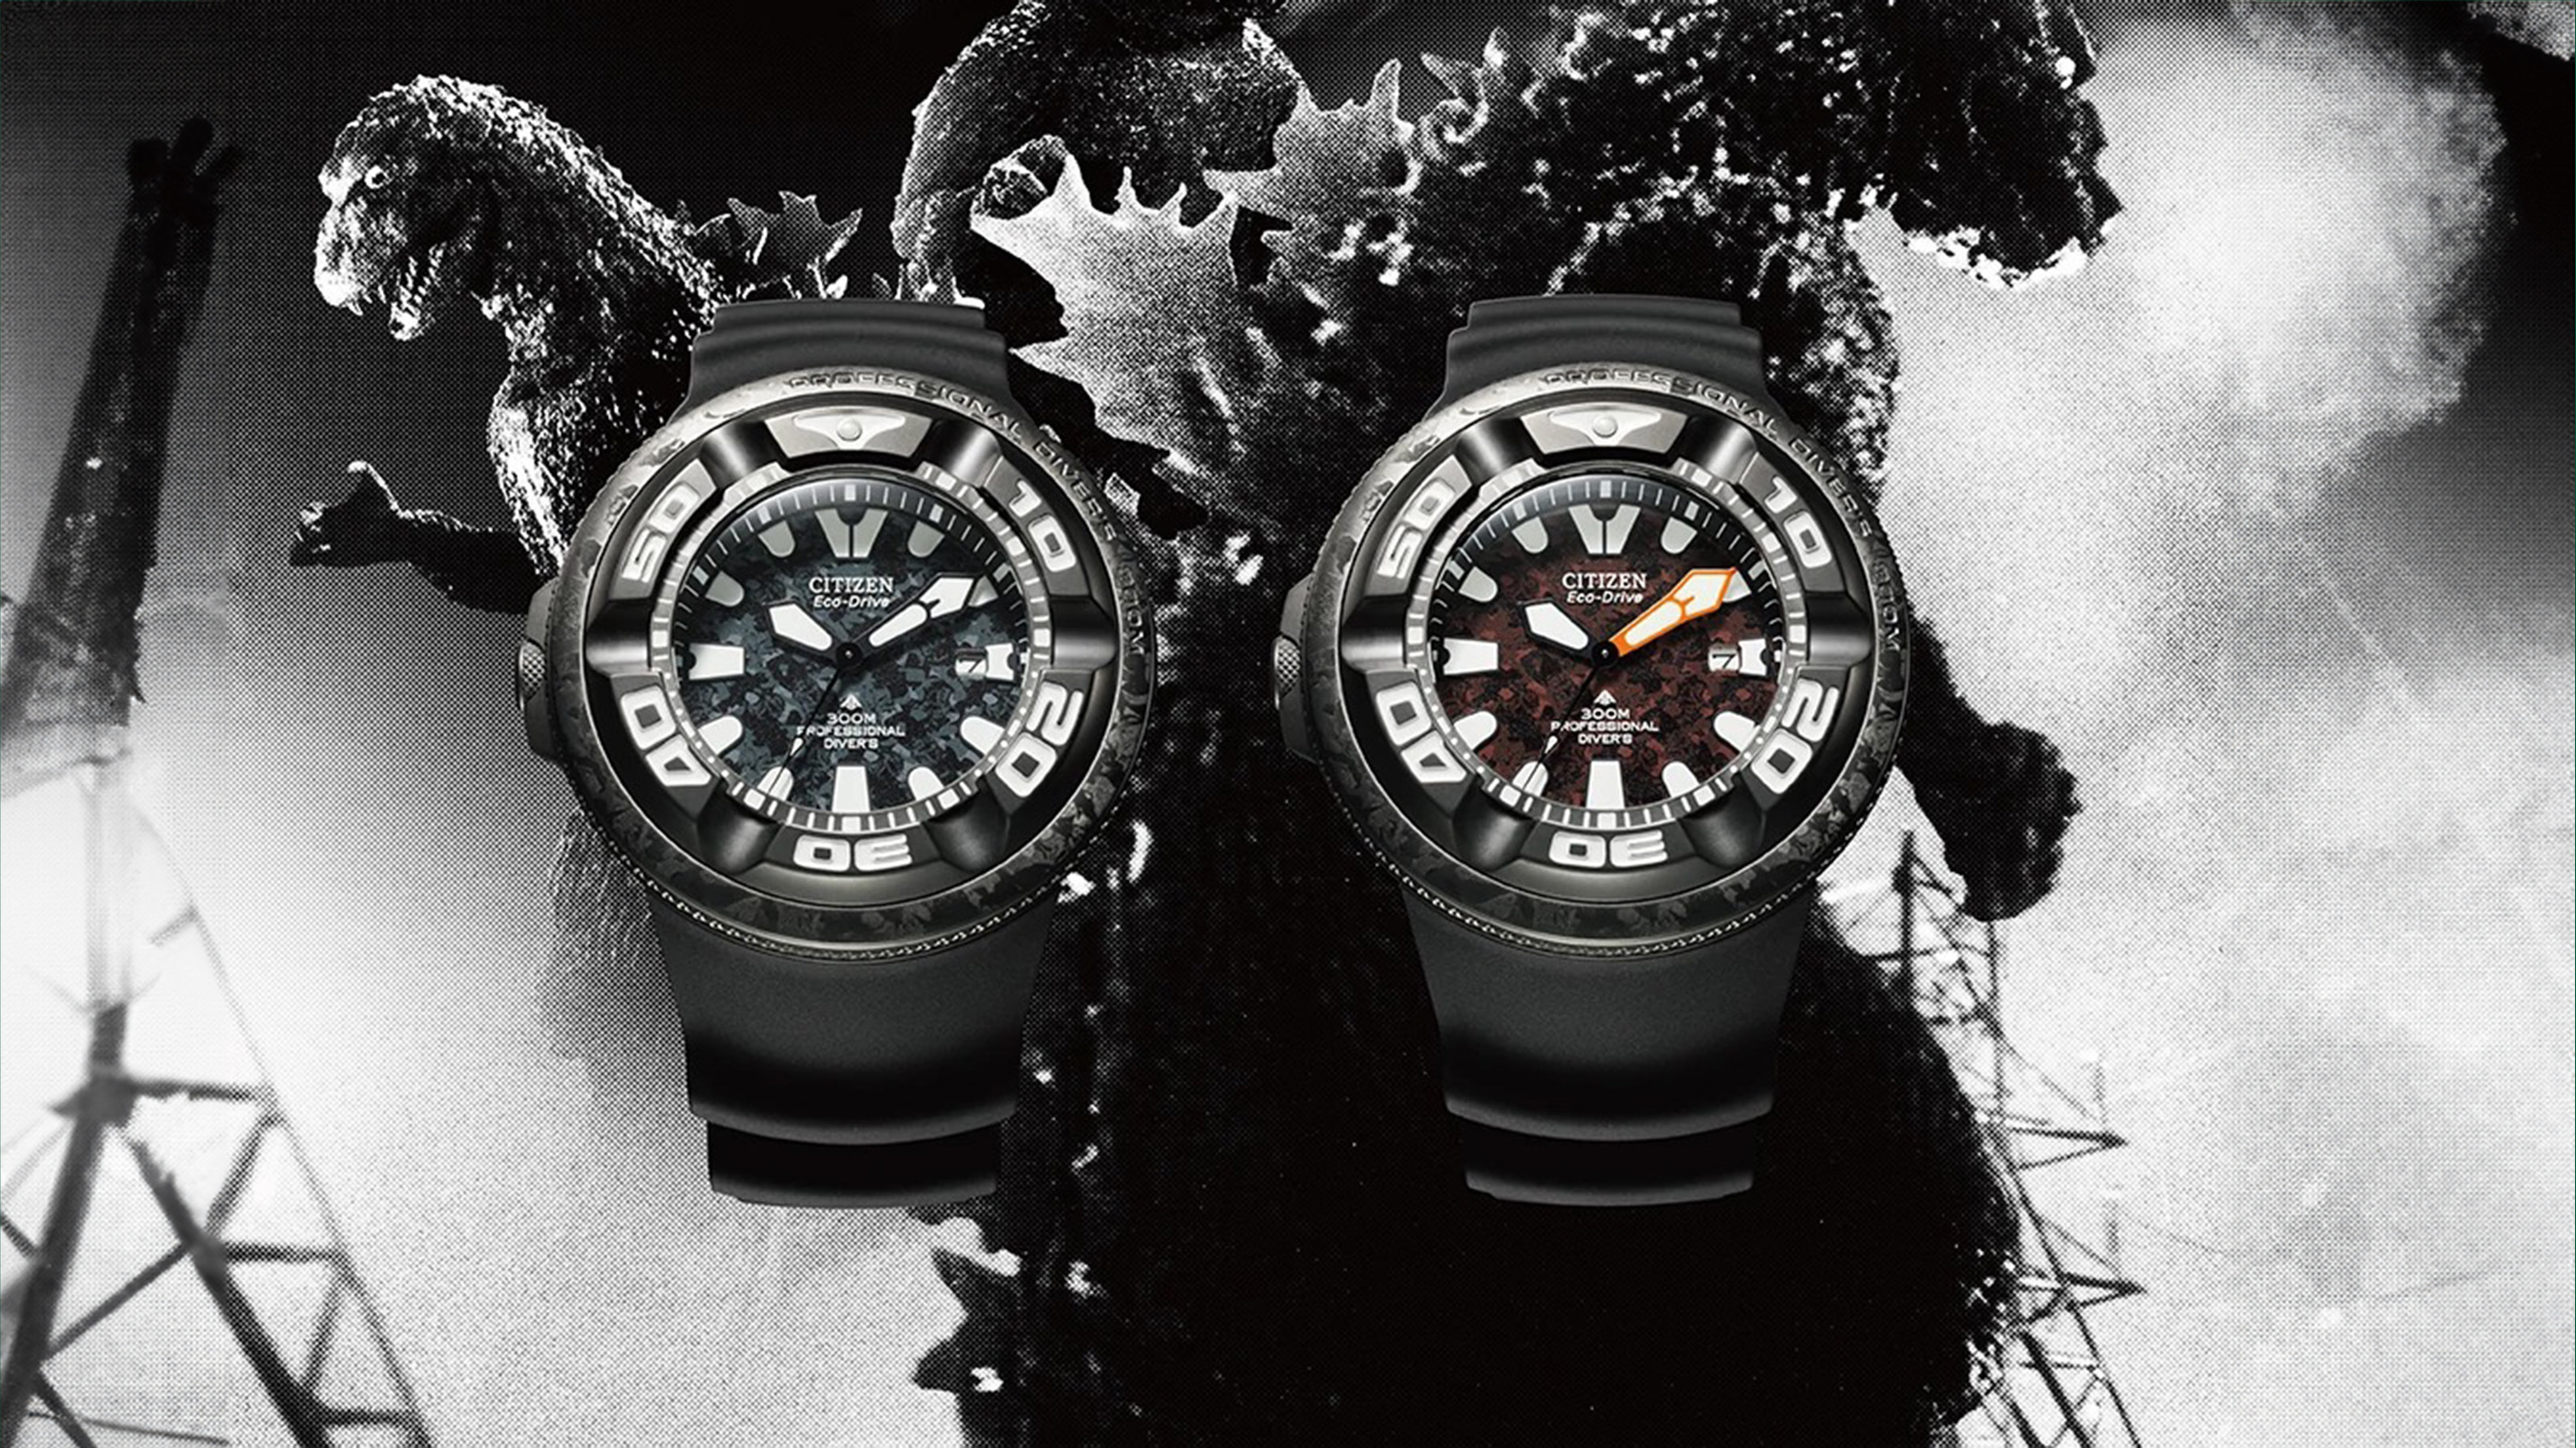 Introducing: Citizen Goes Full 'Zilla' With The New Promaster Dive 